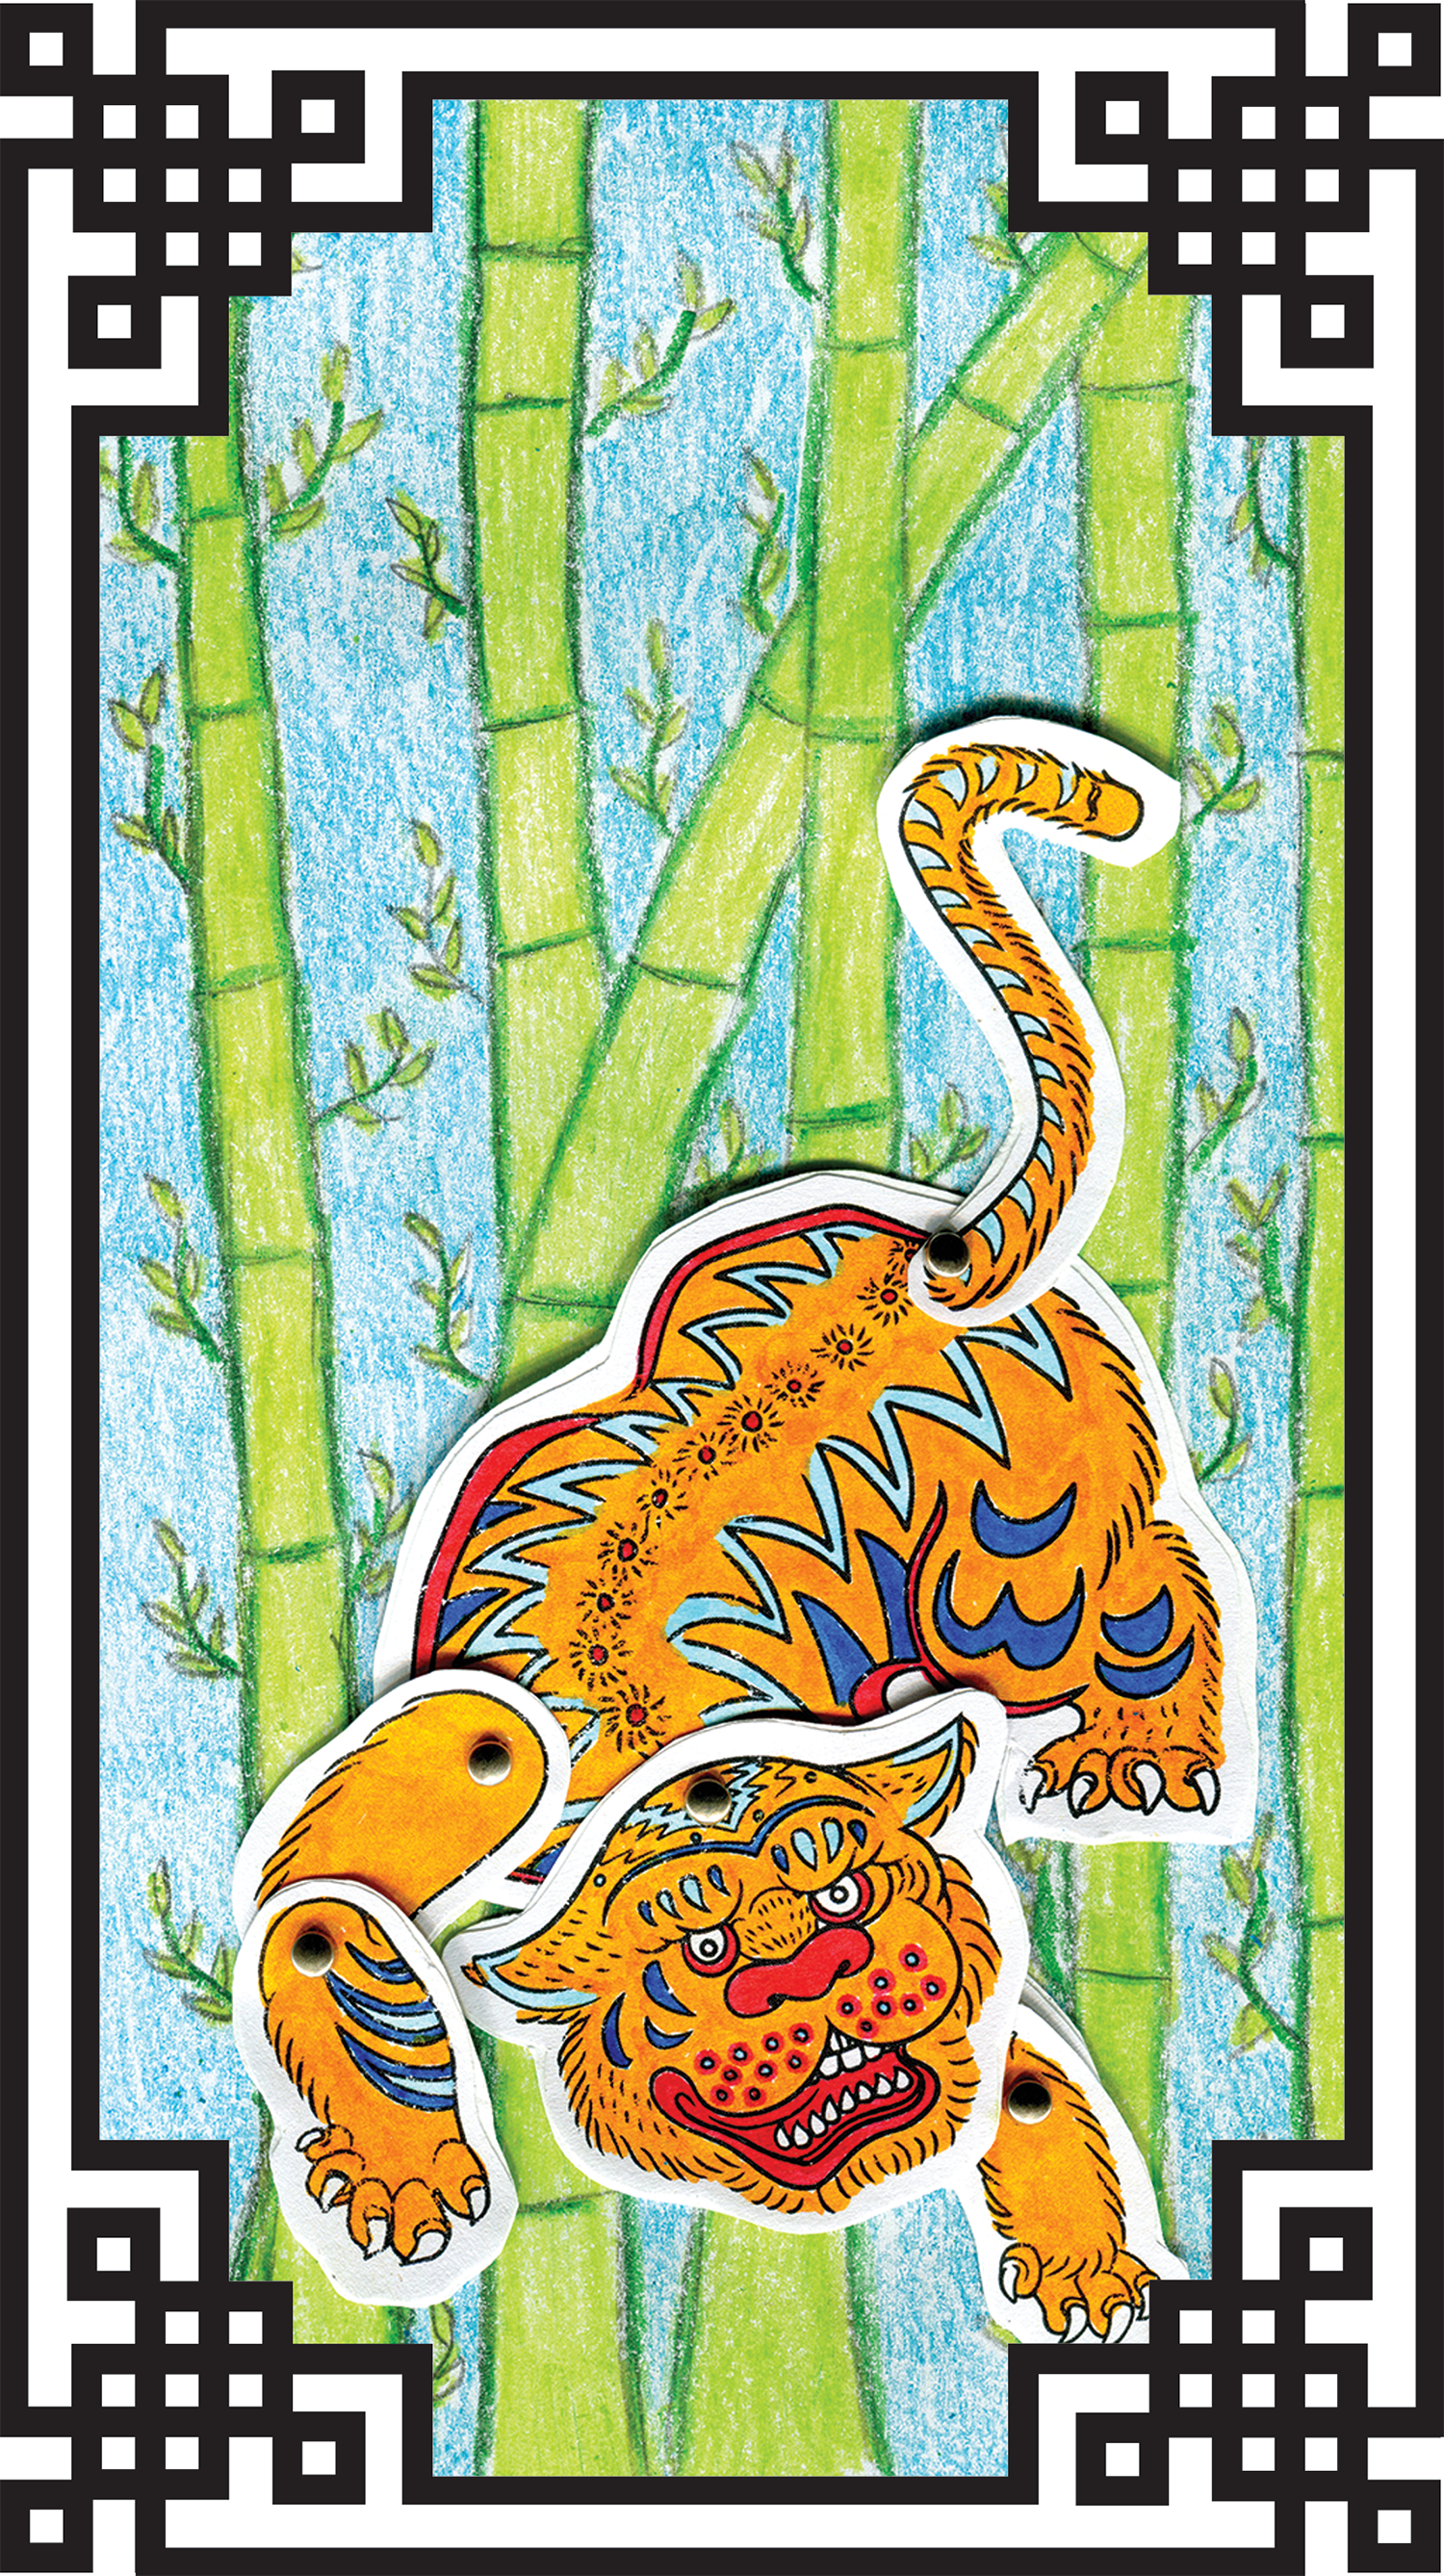 Vertical Yue Moon artwork of a folk art Tiger on a green and blue bamboo background with a traditional Chinese black & white border around it.